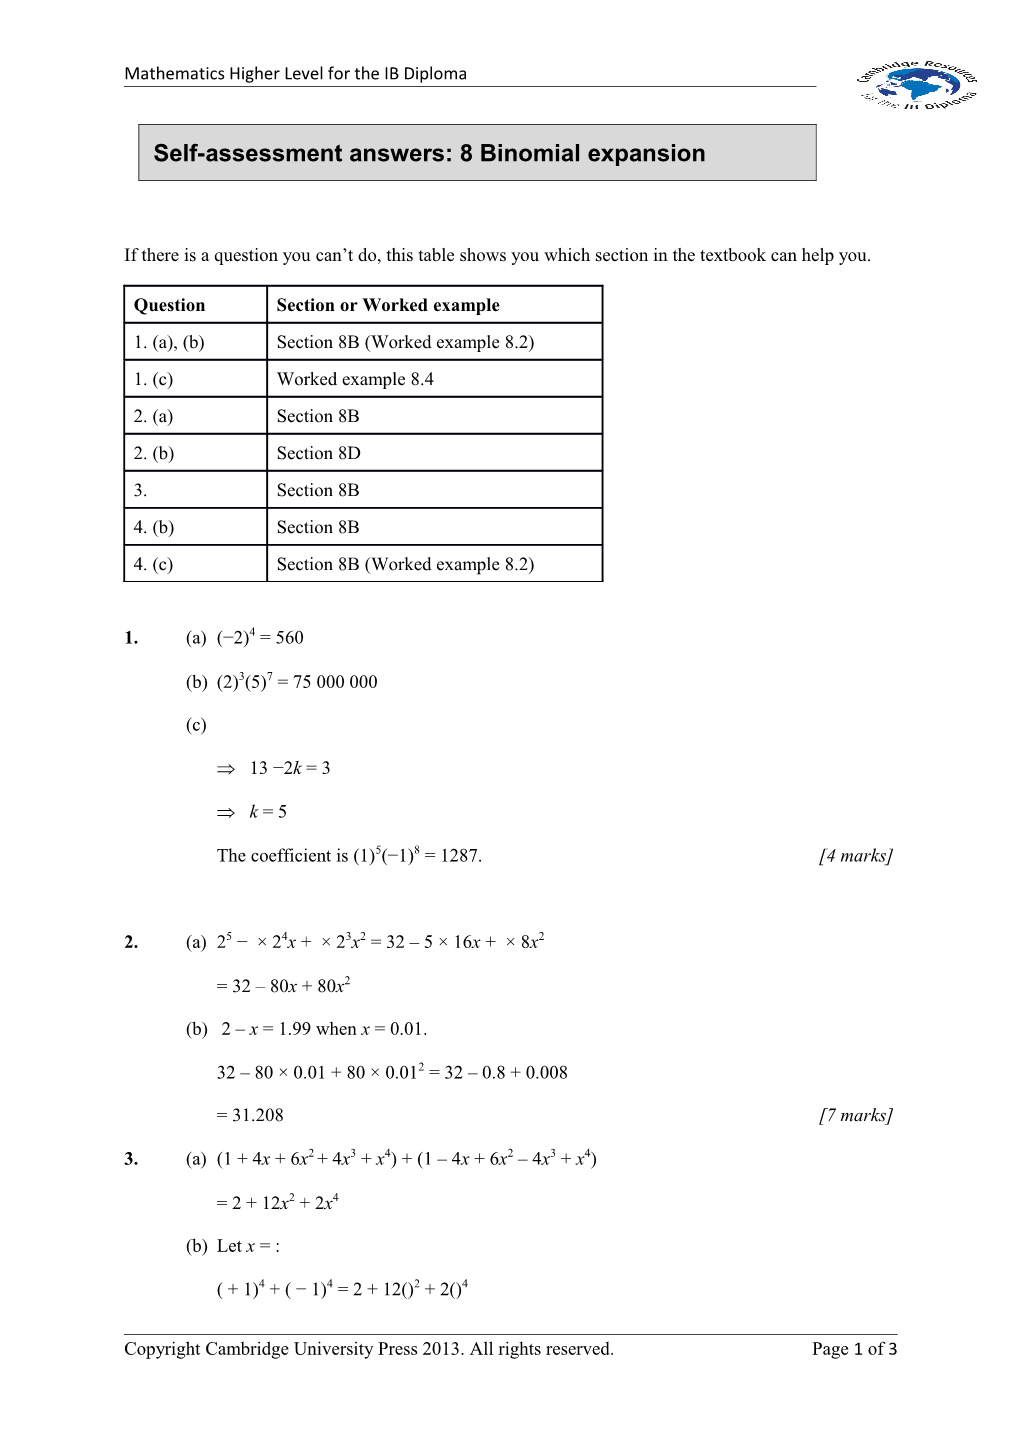 Self-Assessment Answers: 8 Binomial Expansion